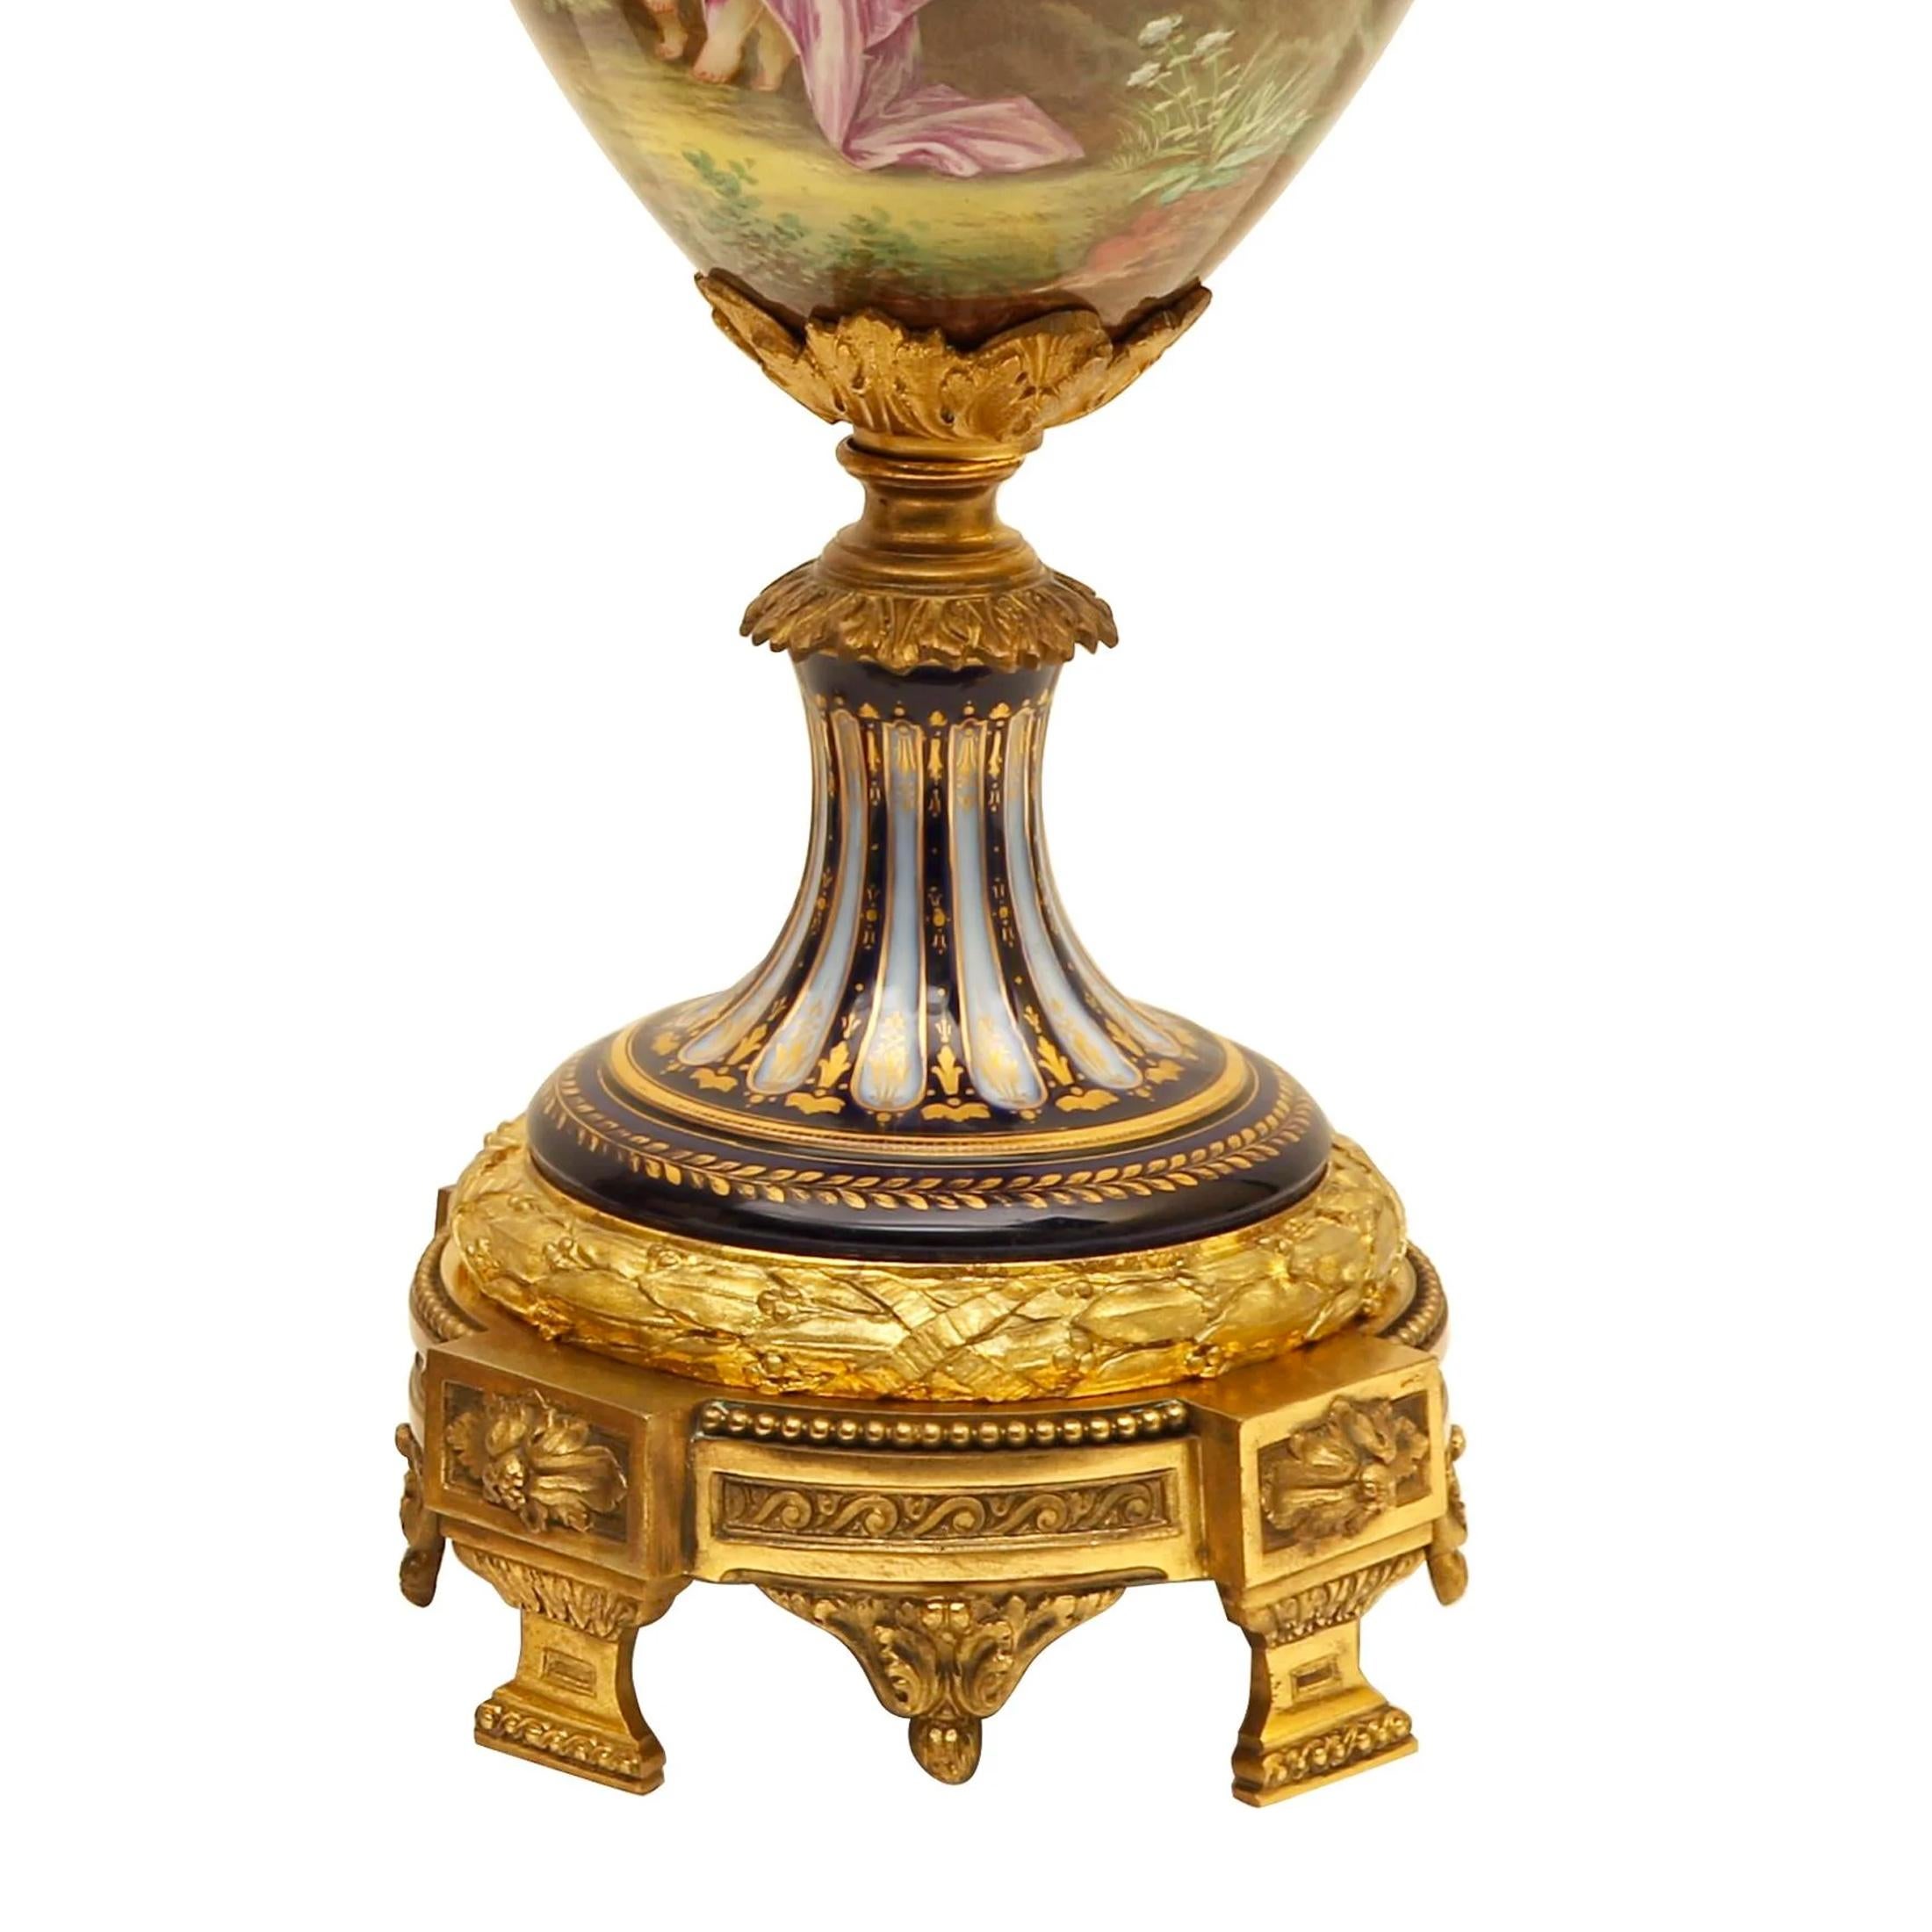 19th Century Gilt Bronze-Mounted Amphora Shaped Sèvres Style Porcelain Vase and Cover For Sale